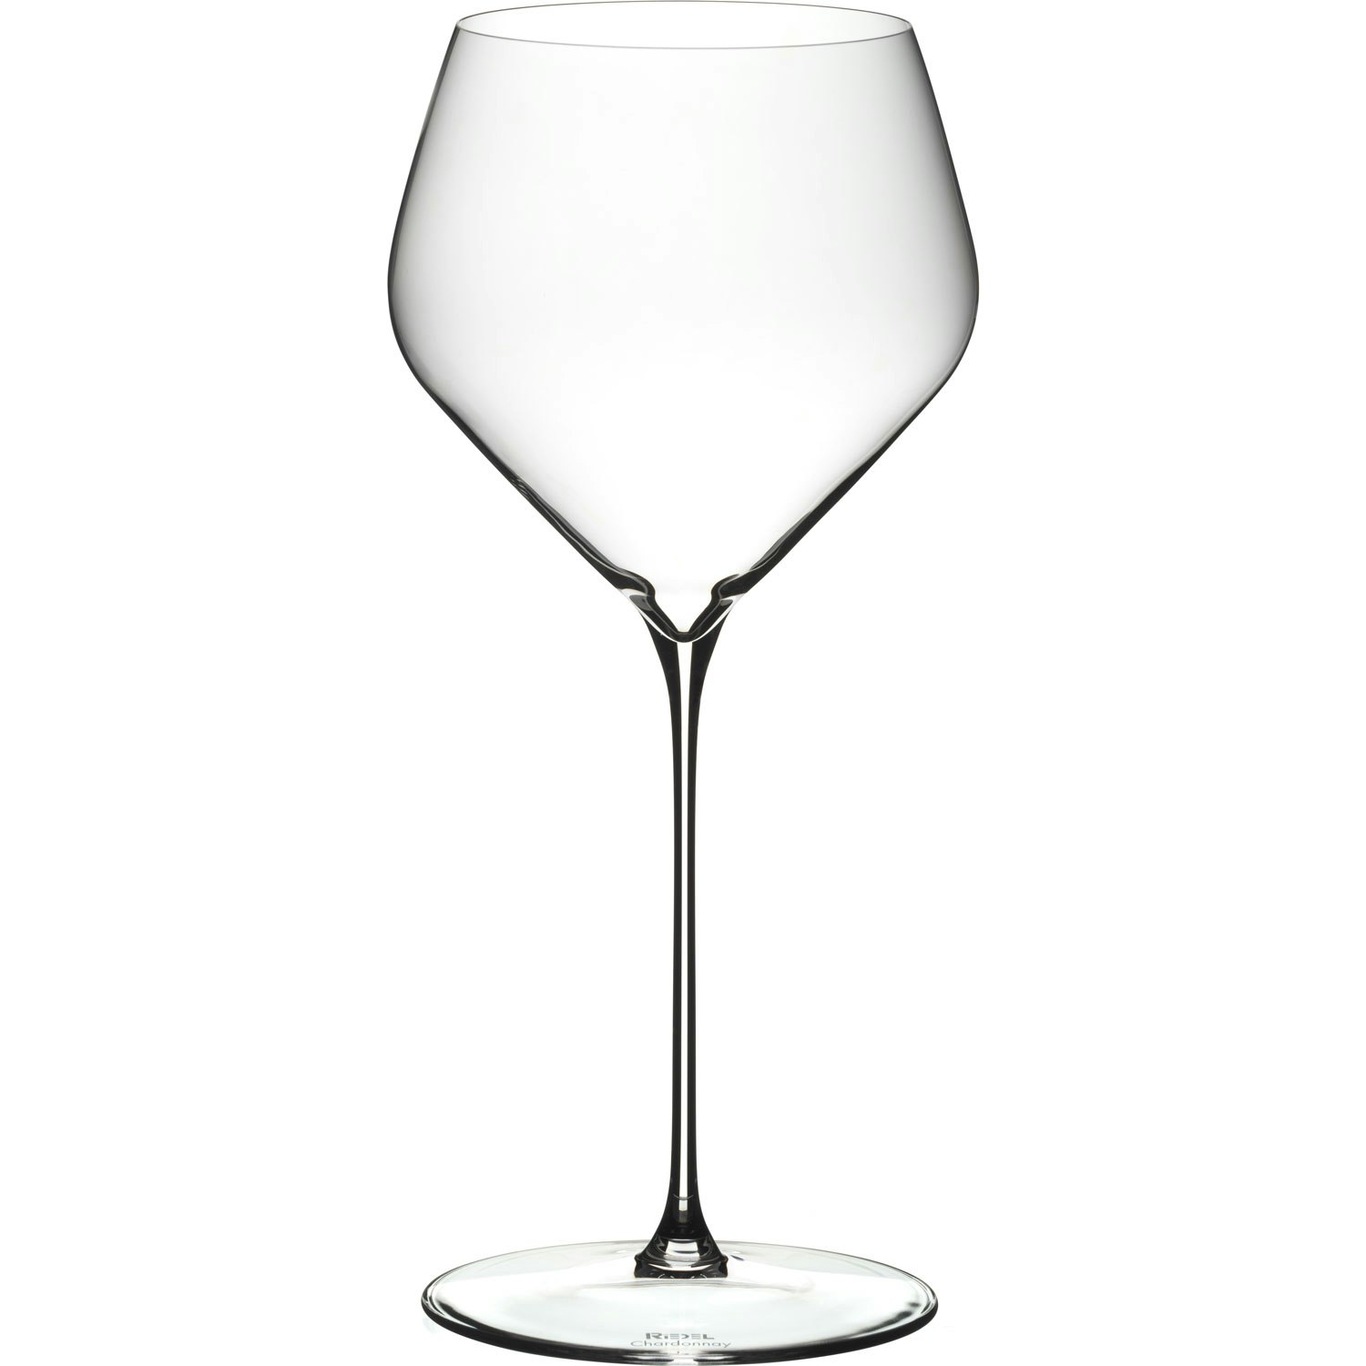 Riedel The O Wine Tumbler Glasses, Oaked Chardonnay - 2 pieces